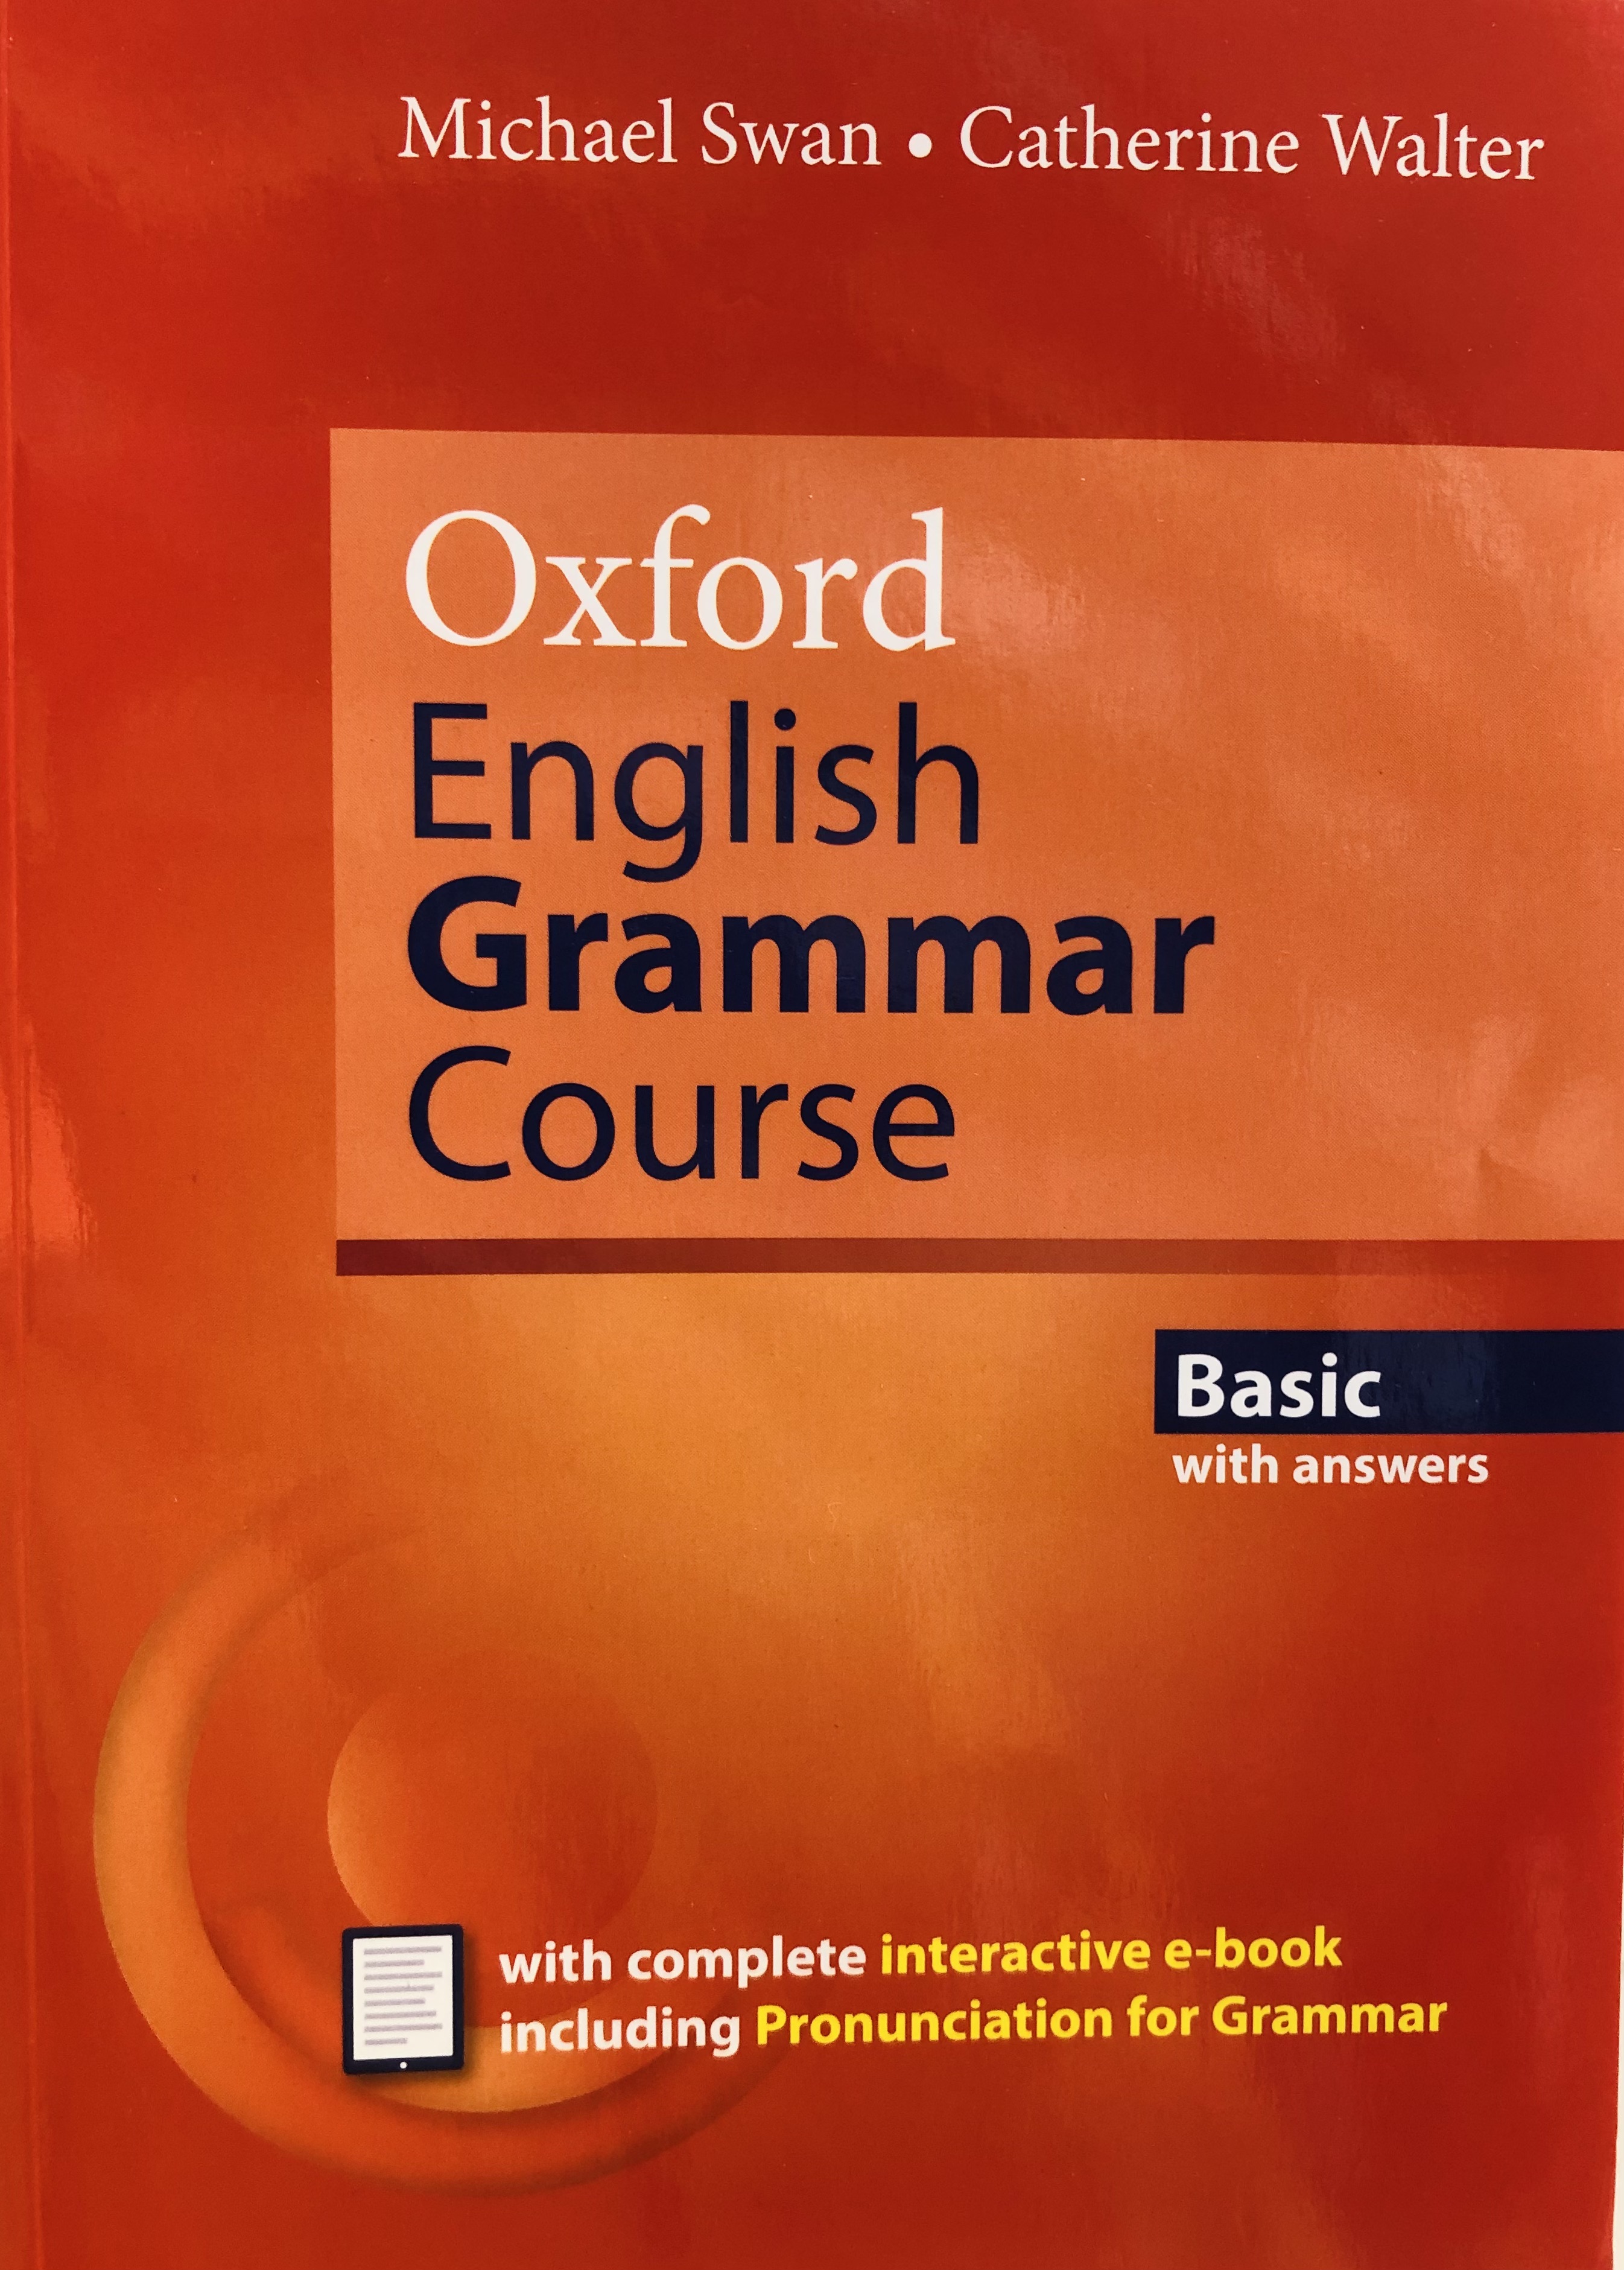 Oxford English Grammar Course with answers [access code for e-book]